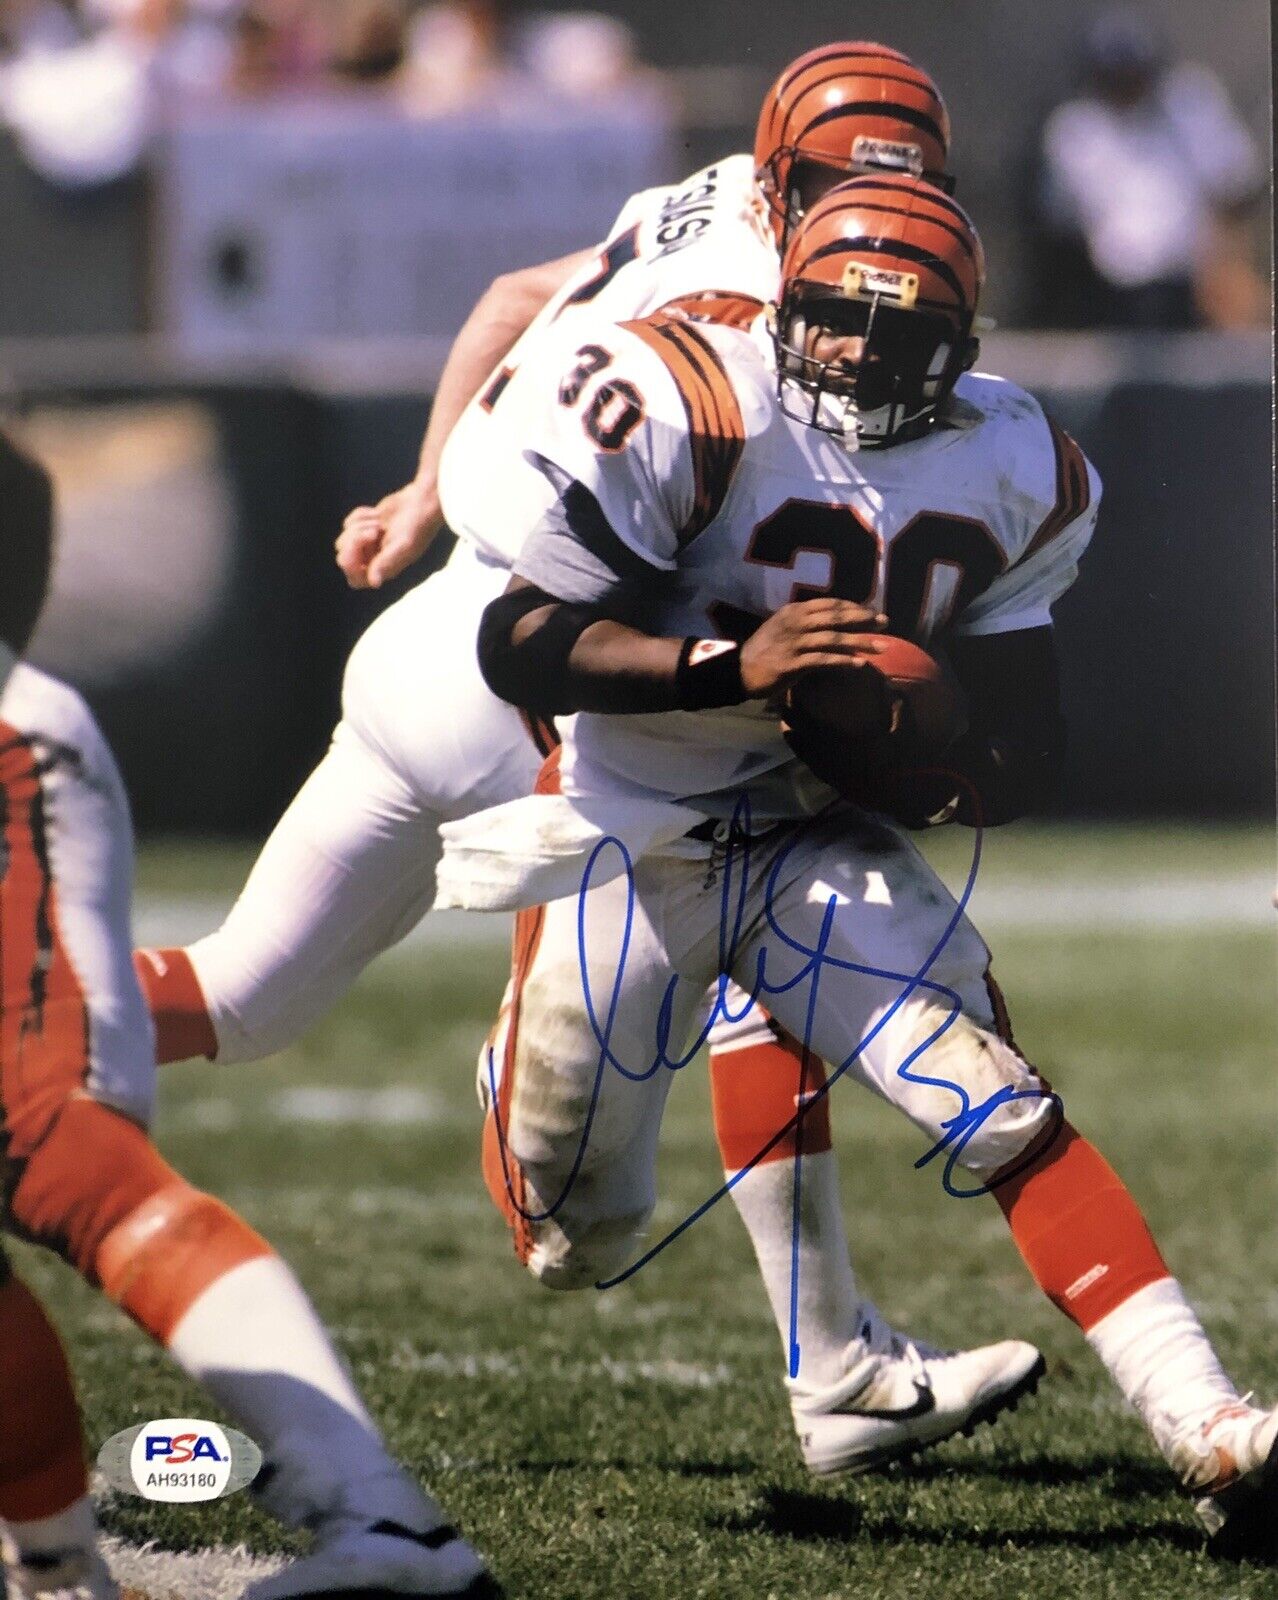 Ickey Woods Signed Autographed Cincinnati Bengals 8x10 Photo Poster painting Shuffle Psa/Dna